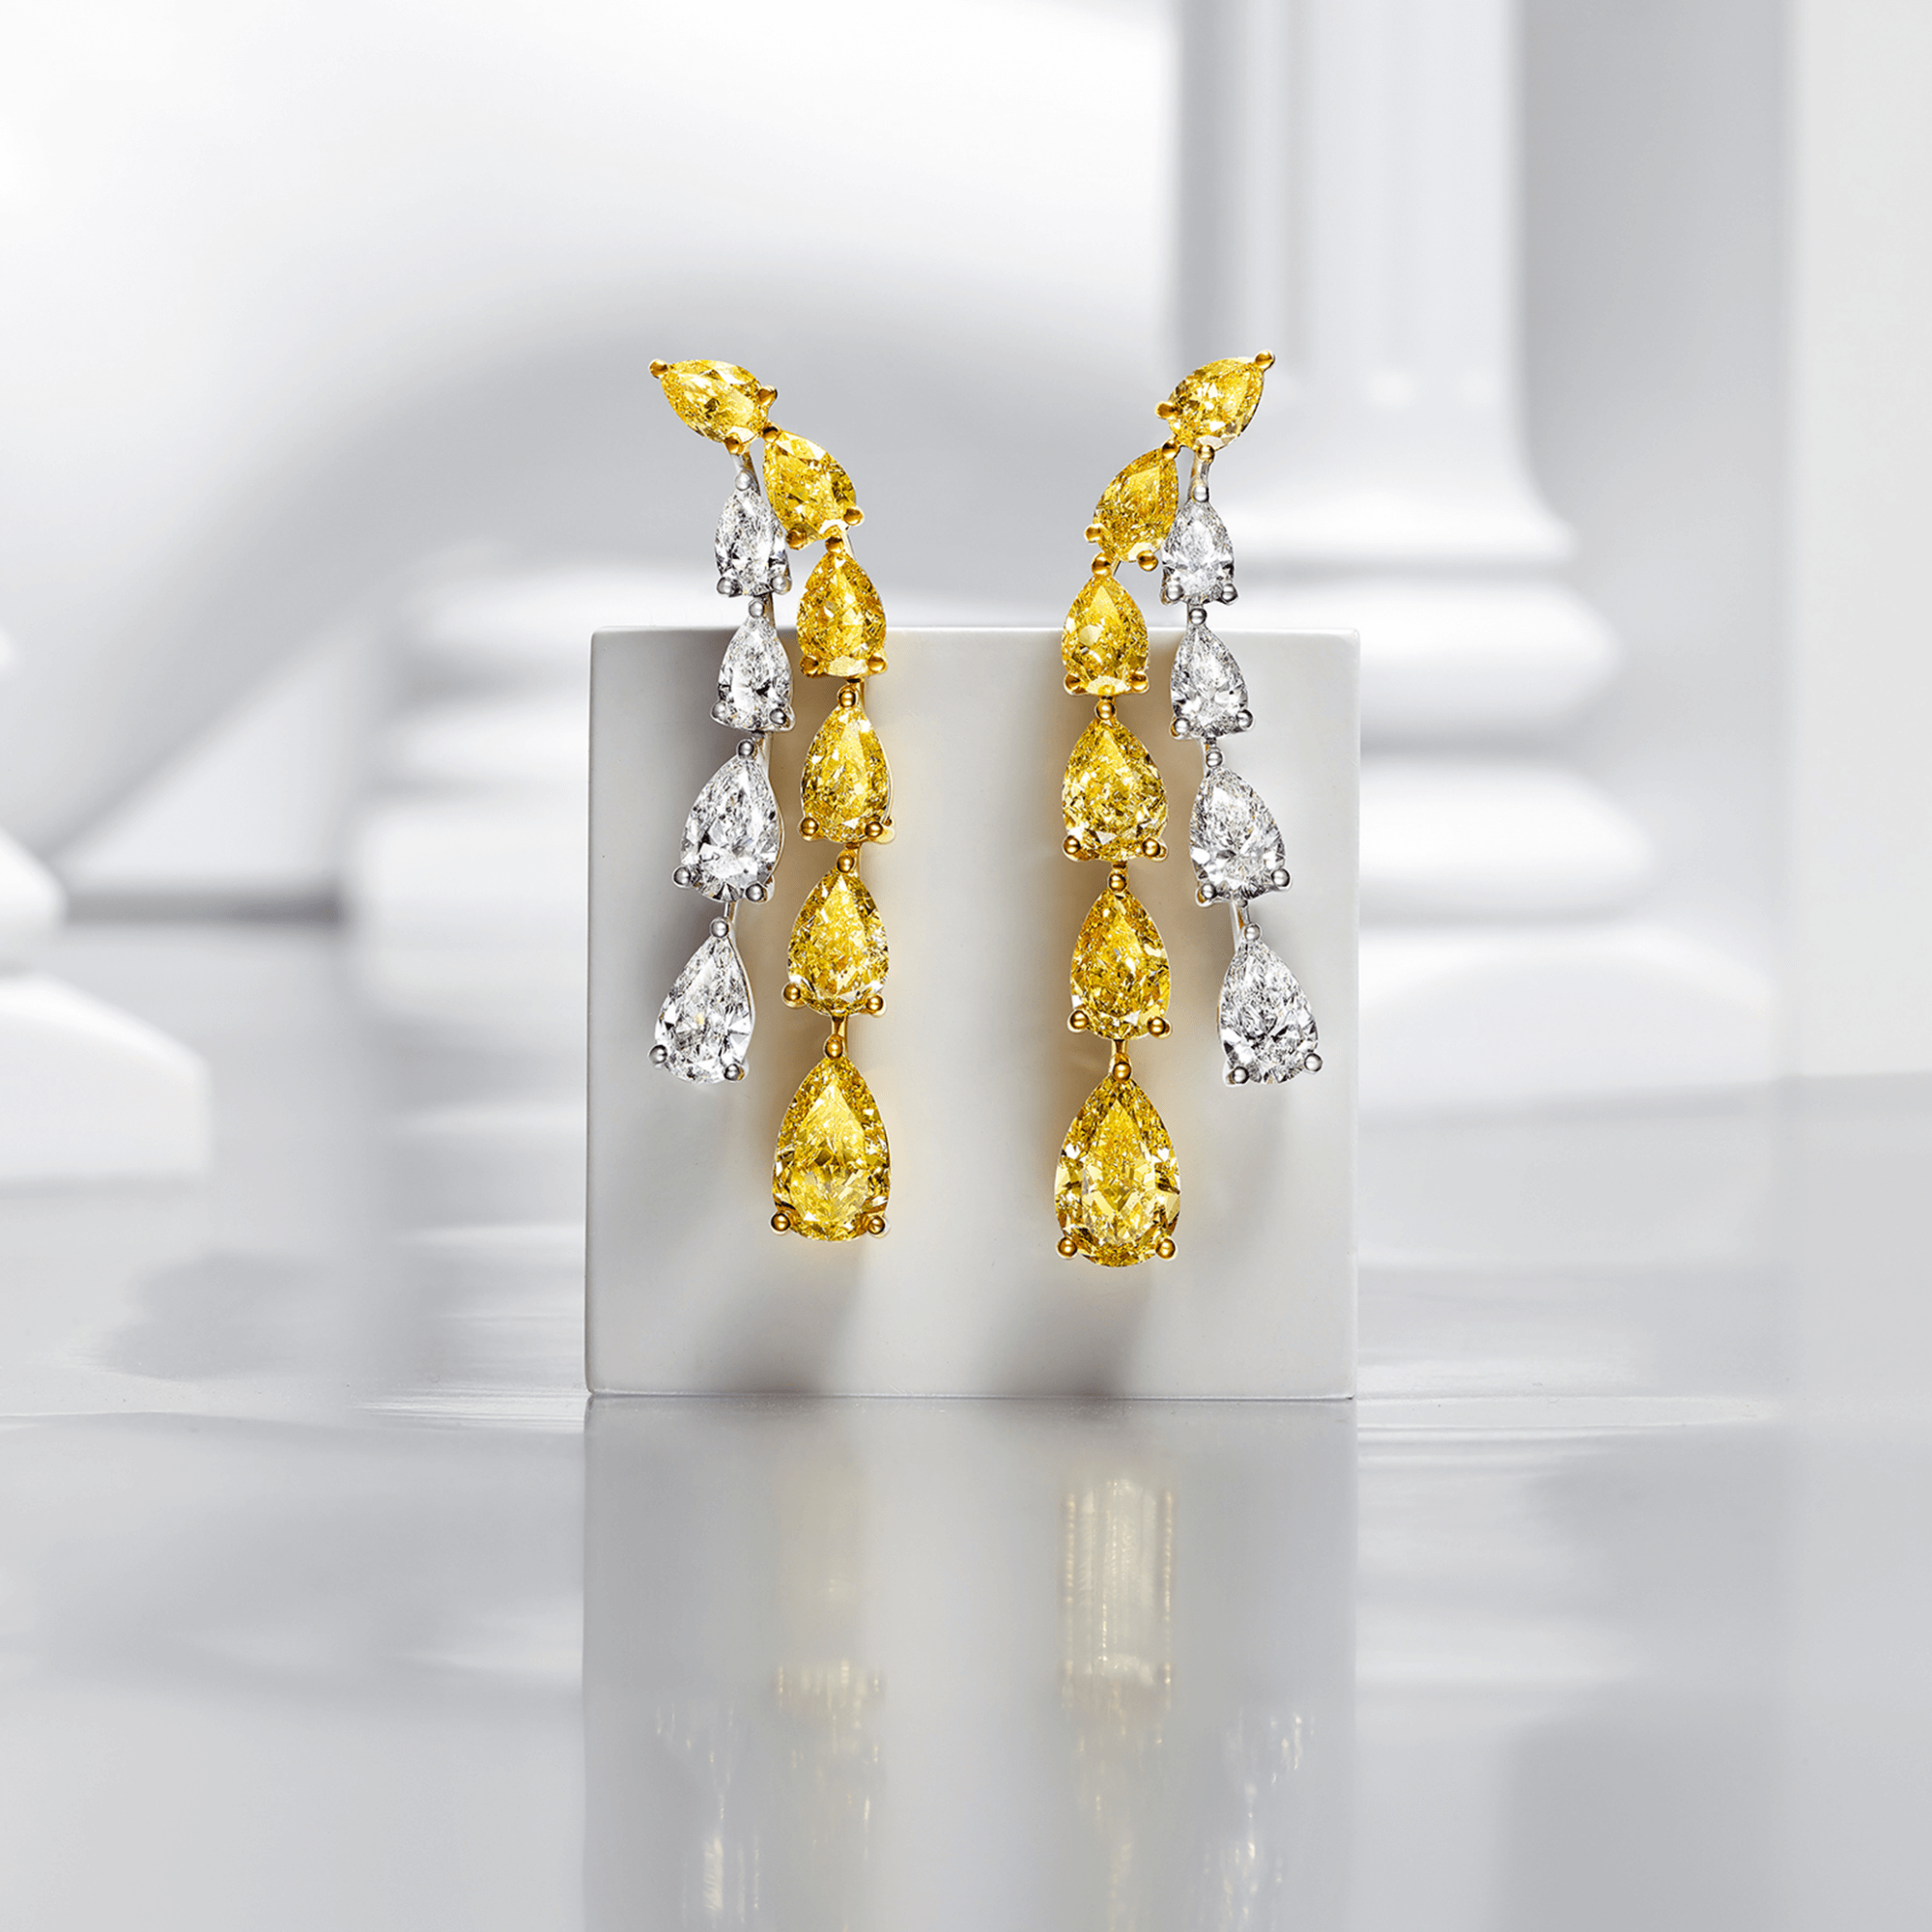 Graff Yellow And White Pear Shaped Diamond High Jewellery Earrings inside a Gallery